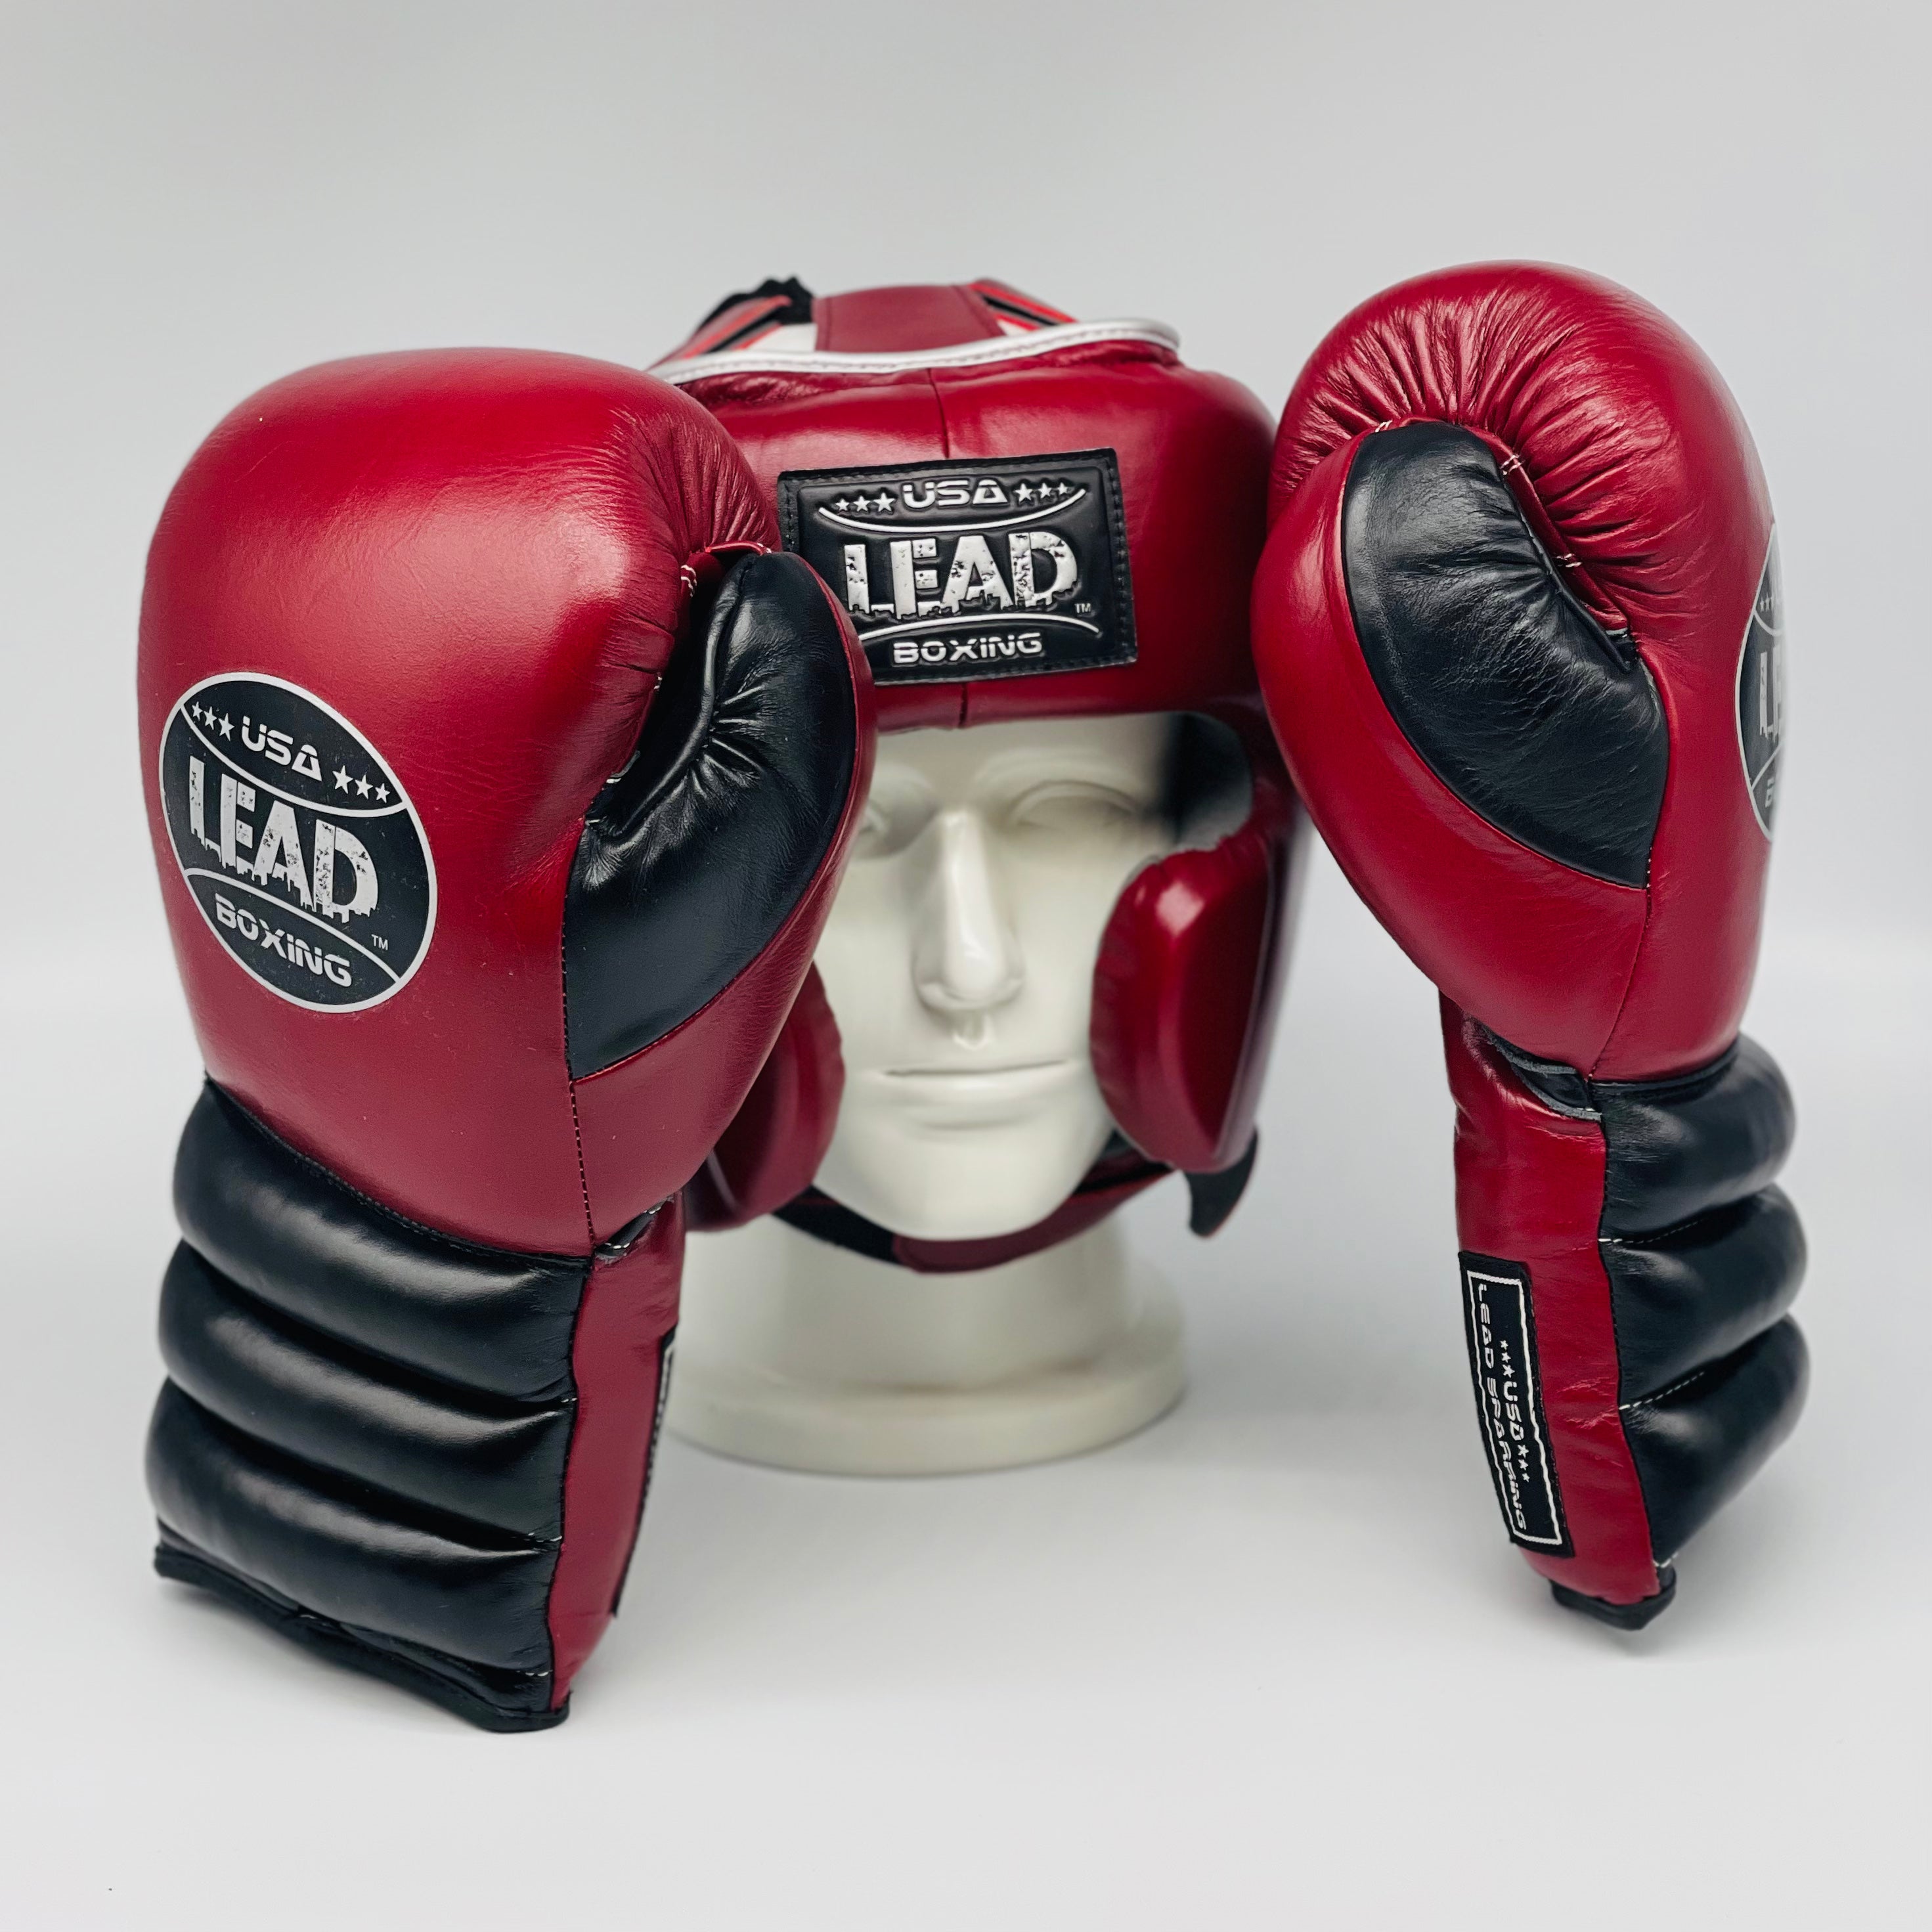 LEAD Boxing Sparring Set ( Maroon/Black/Silver)